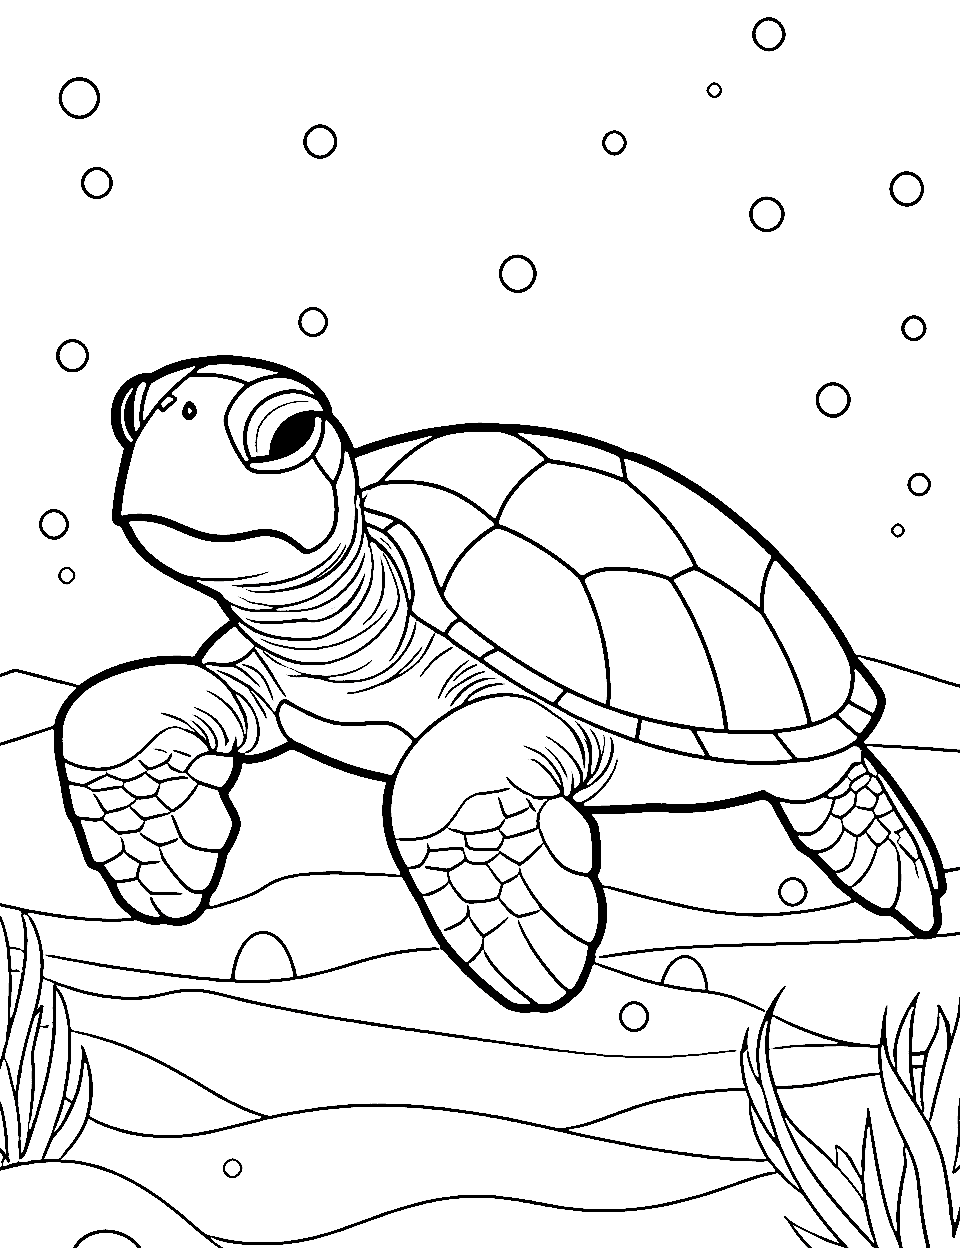 Turtle's Snack Searching Turtle Coloring Page - A turtle on the sea floor looking for seaweed to eat.